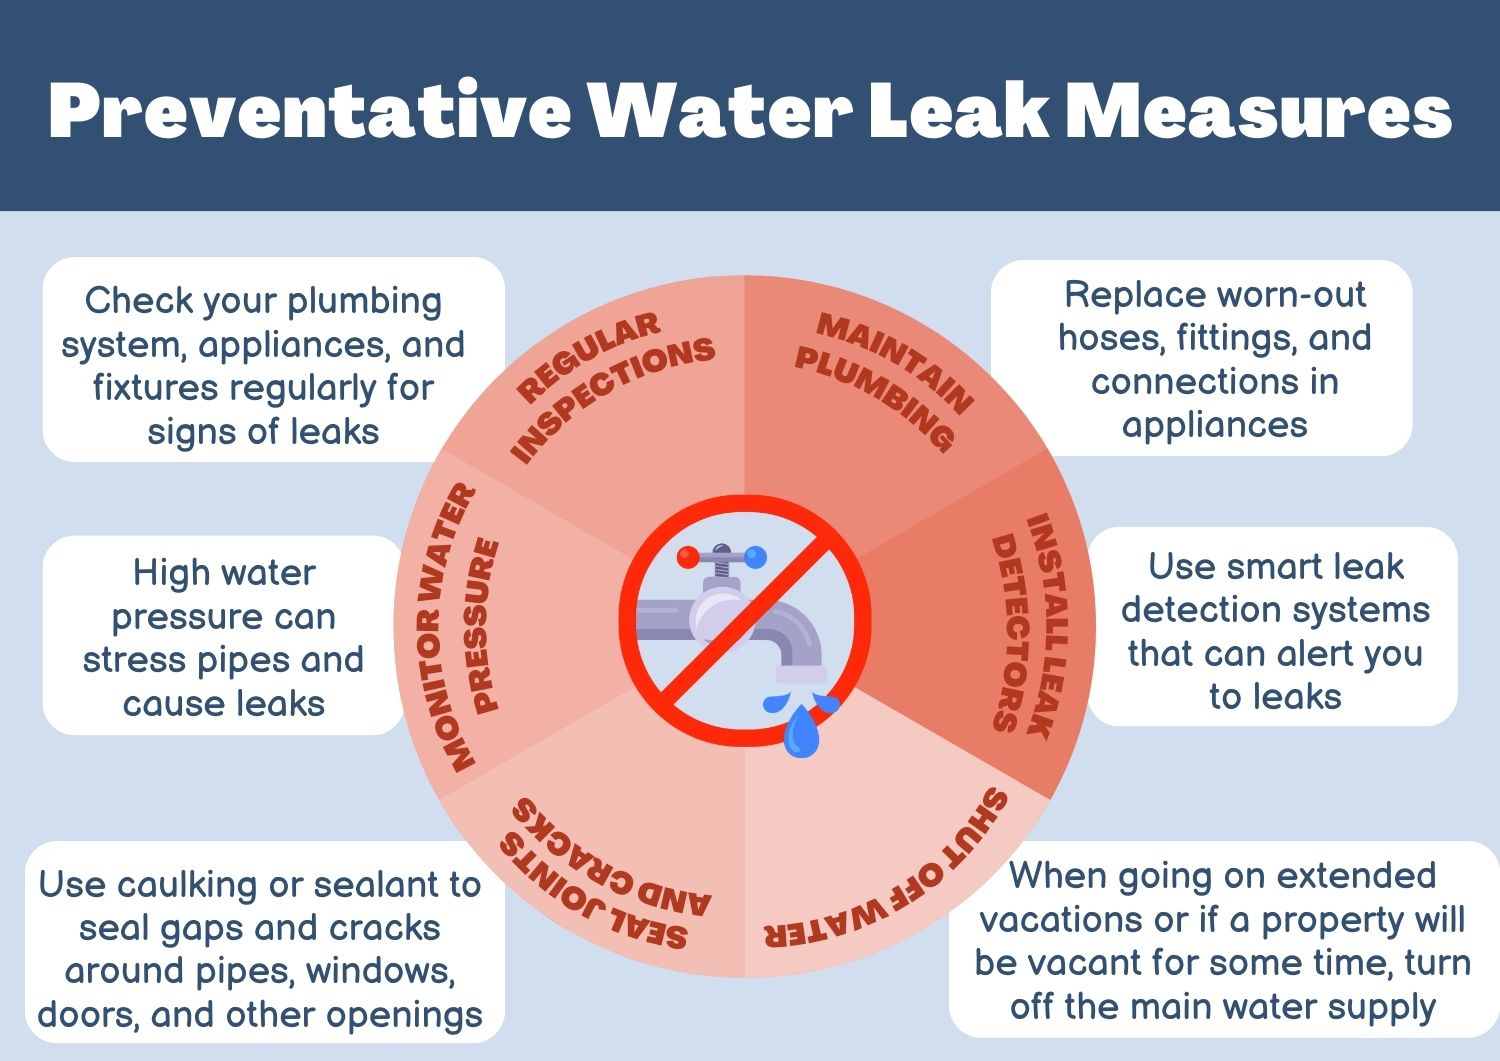 How To Make A Successful Water Leak Insurance Claim - Preventative Water Leak Measures Infographic 